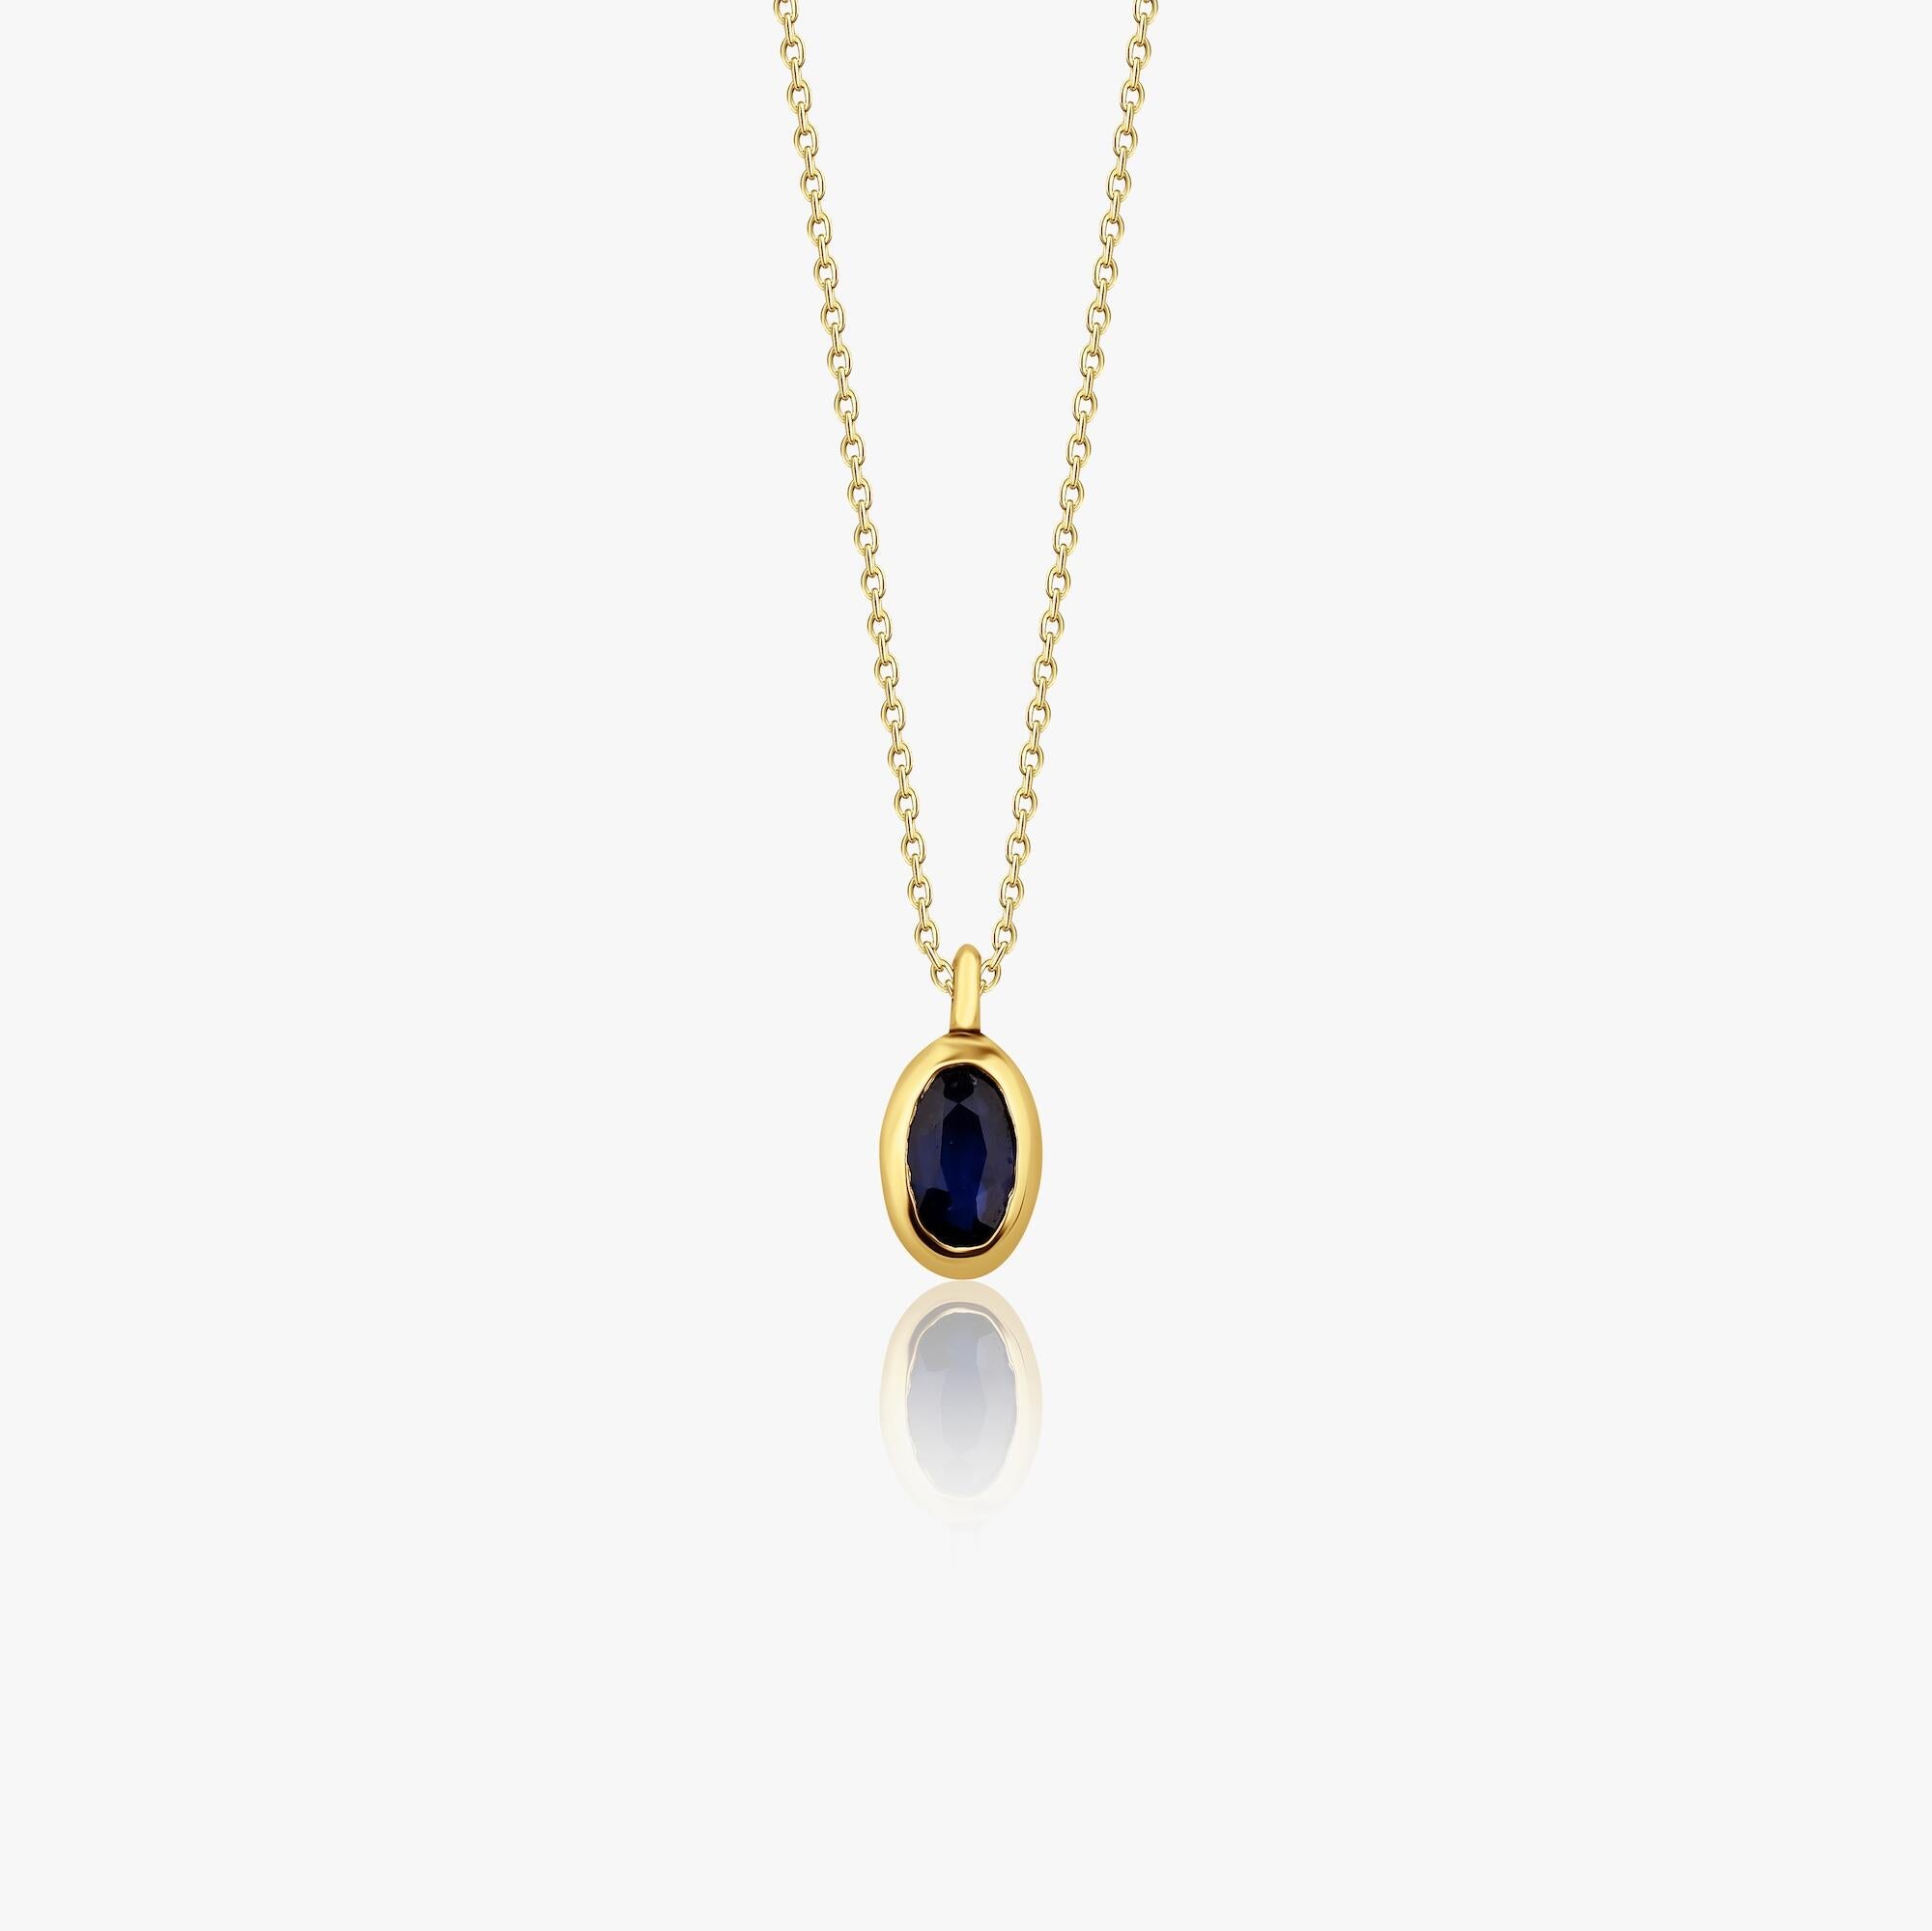 Oval Cut Blue Sapphire Solitaire Necklace Available in 14K and 18K Gold